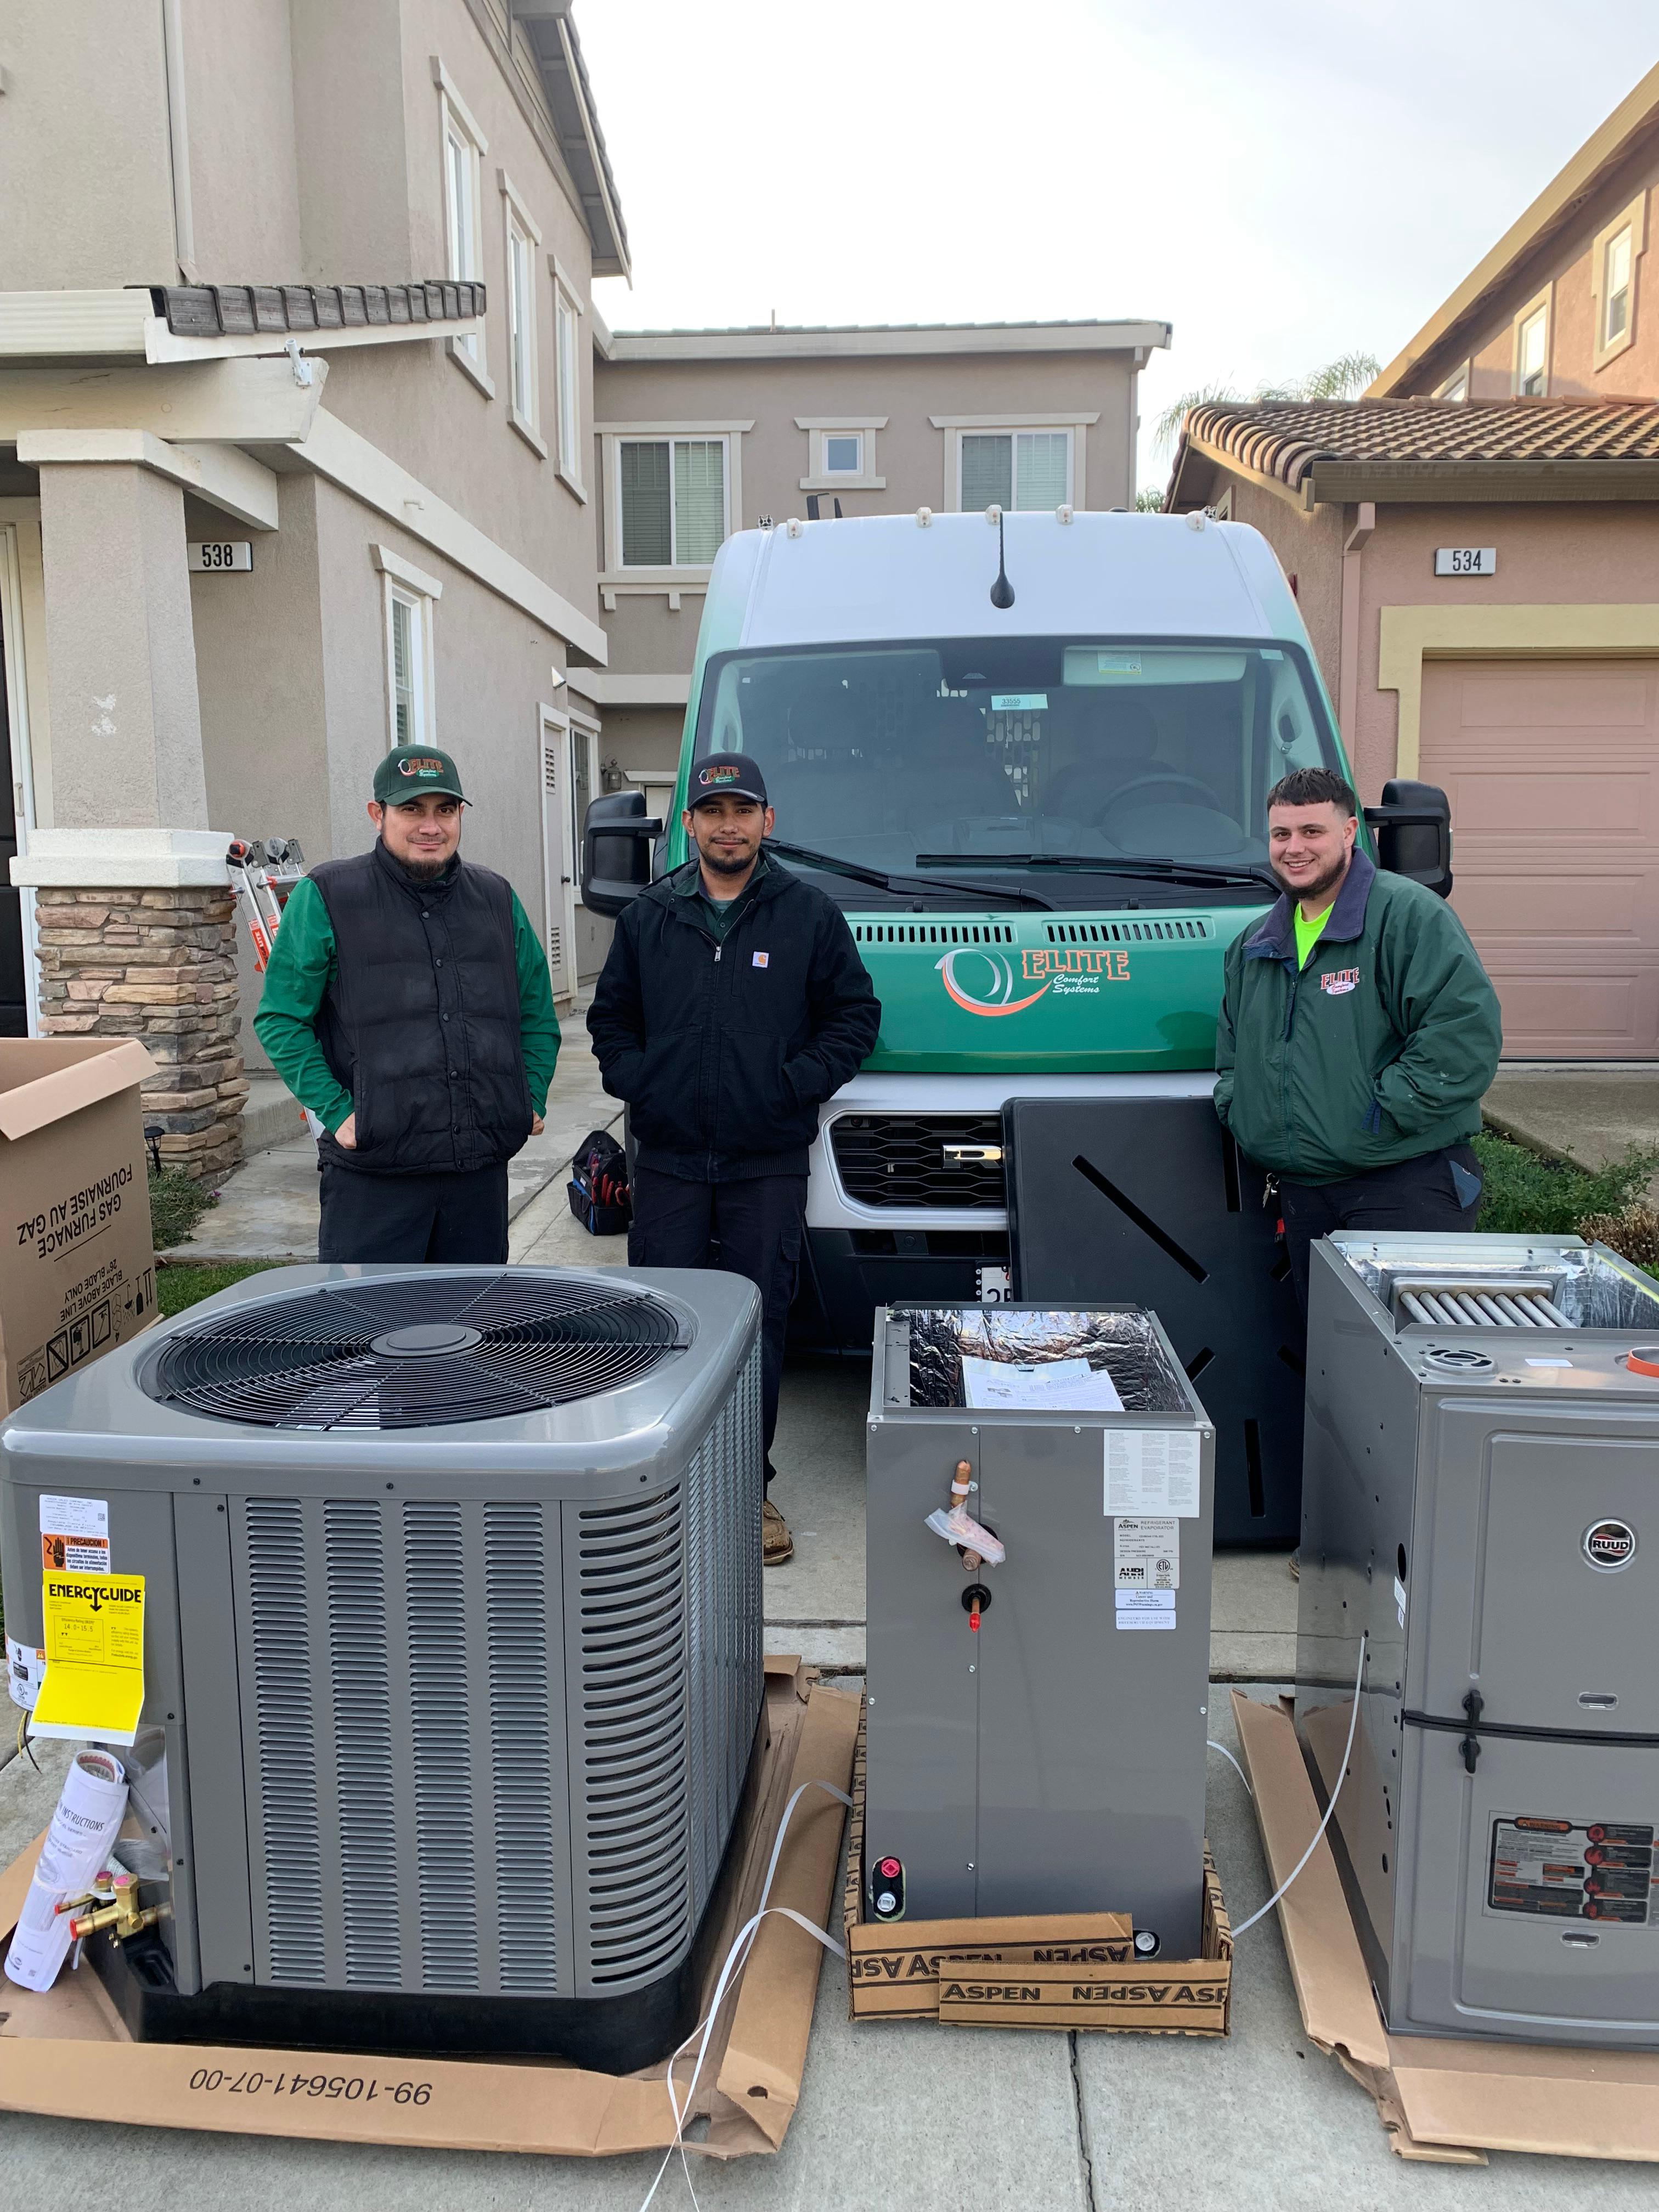 On the morning of a new installation!  #acinstallation #newairconditioner #furnaceinstallation #heat Elite Comfort Systems Brentwood (925)319-6848